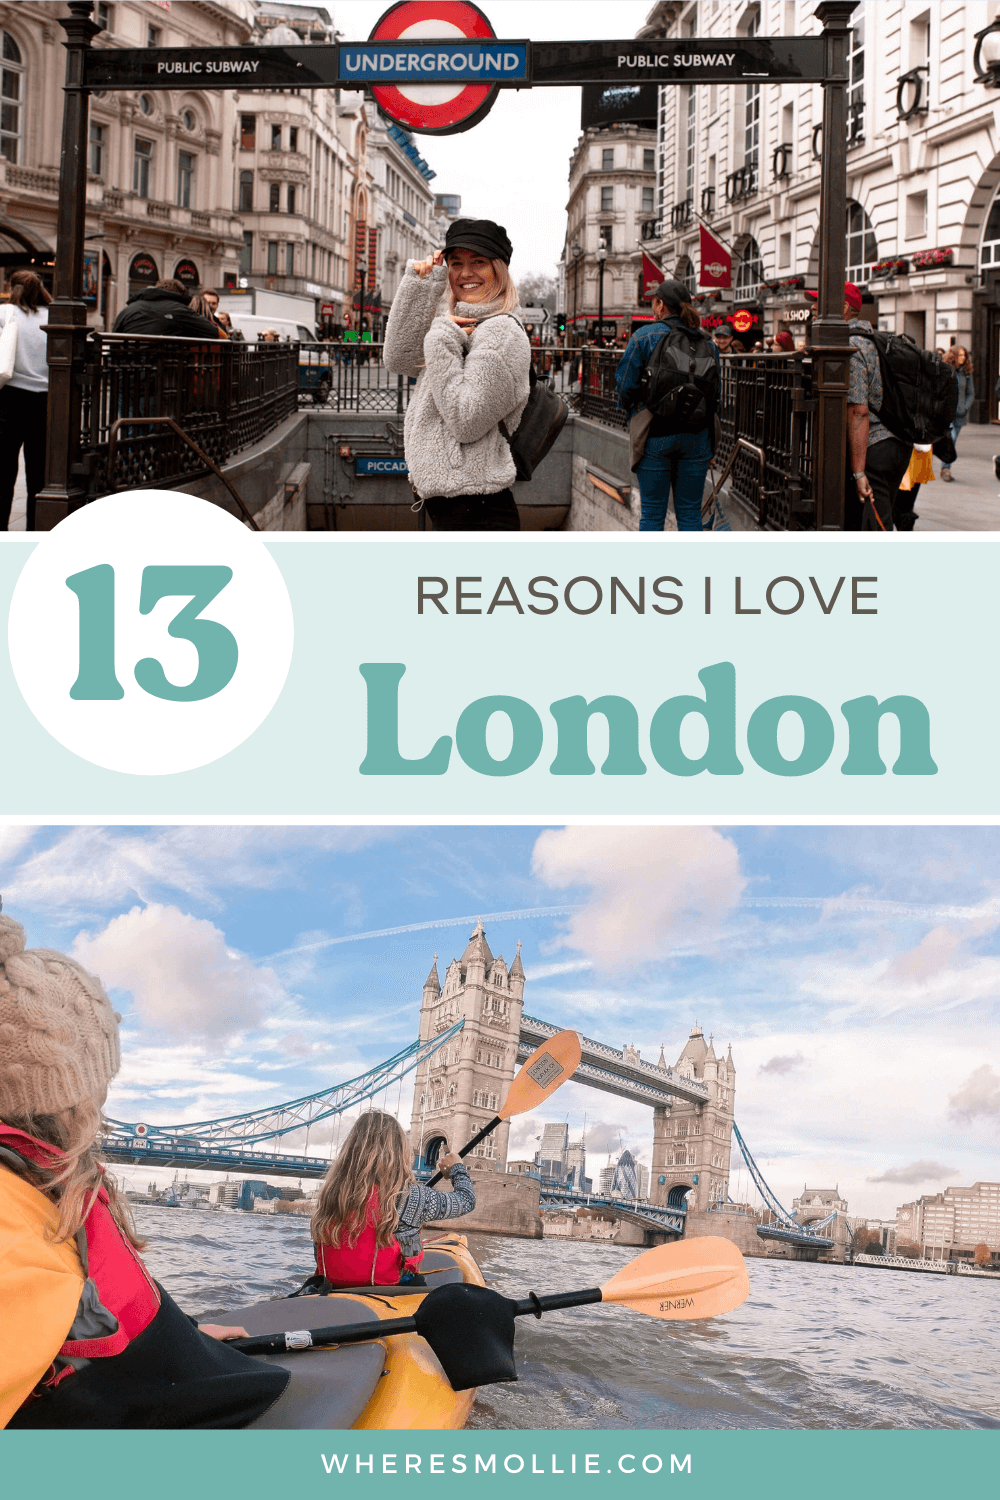 13 reasons why you'll fall in love with London